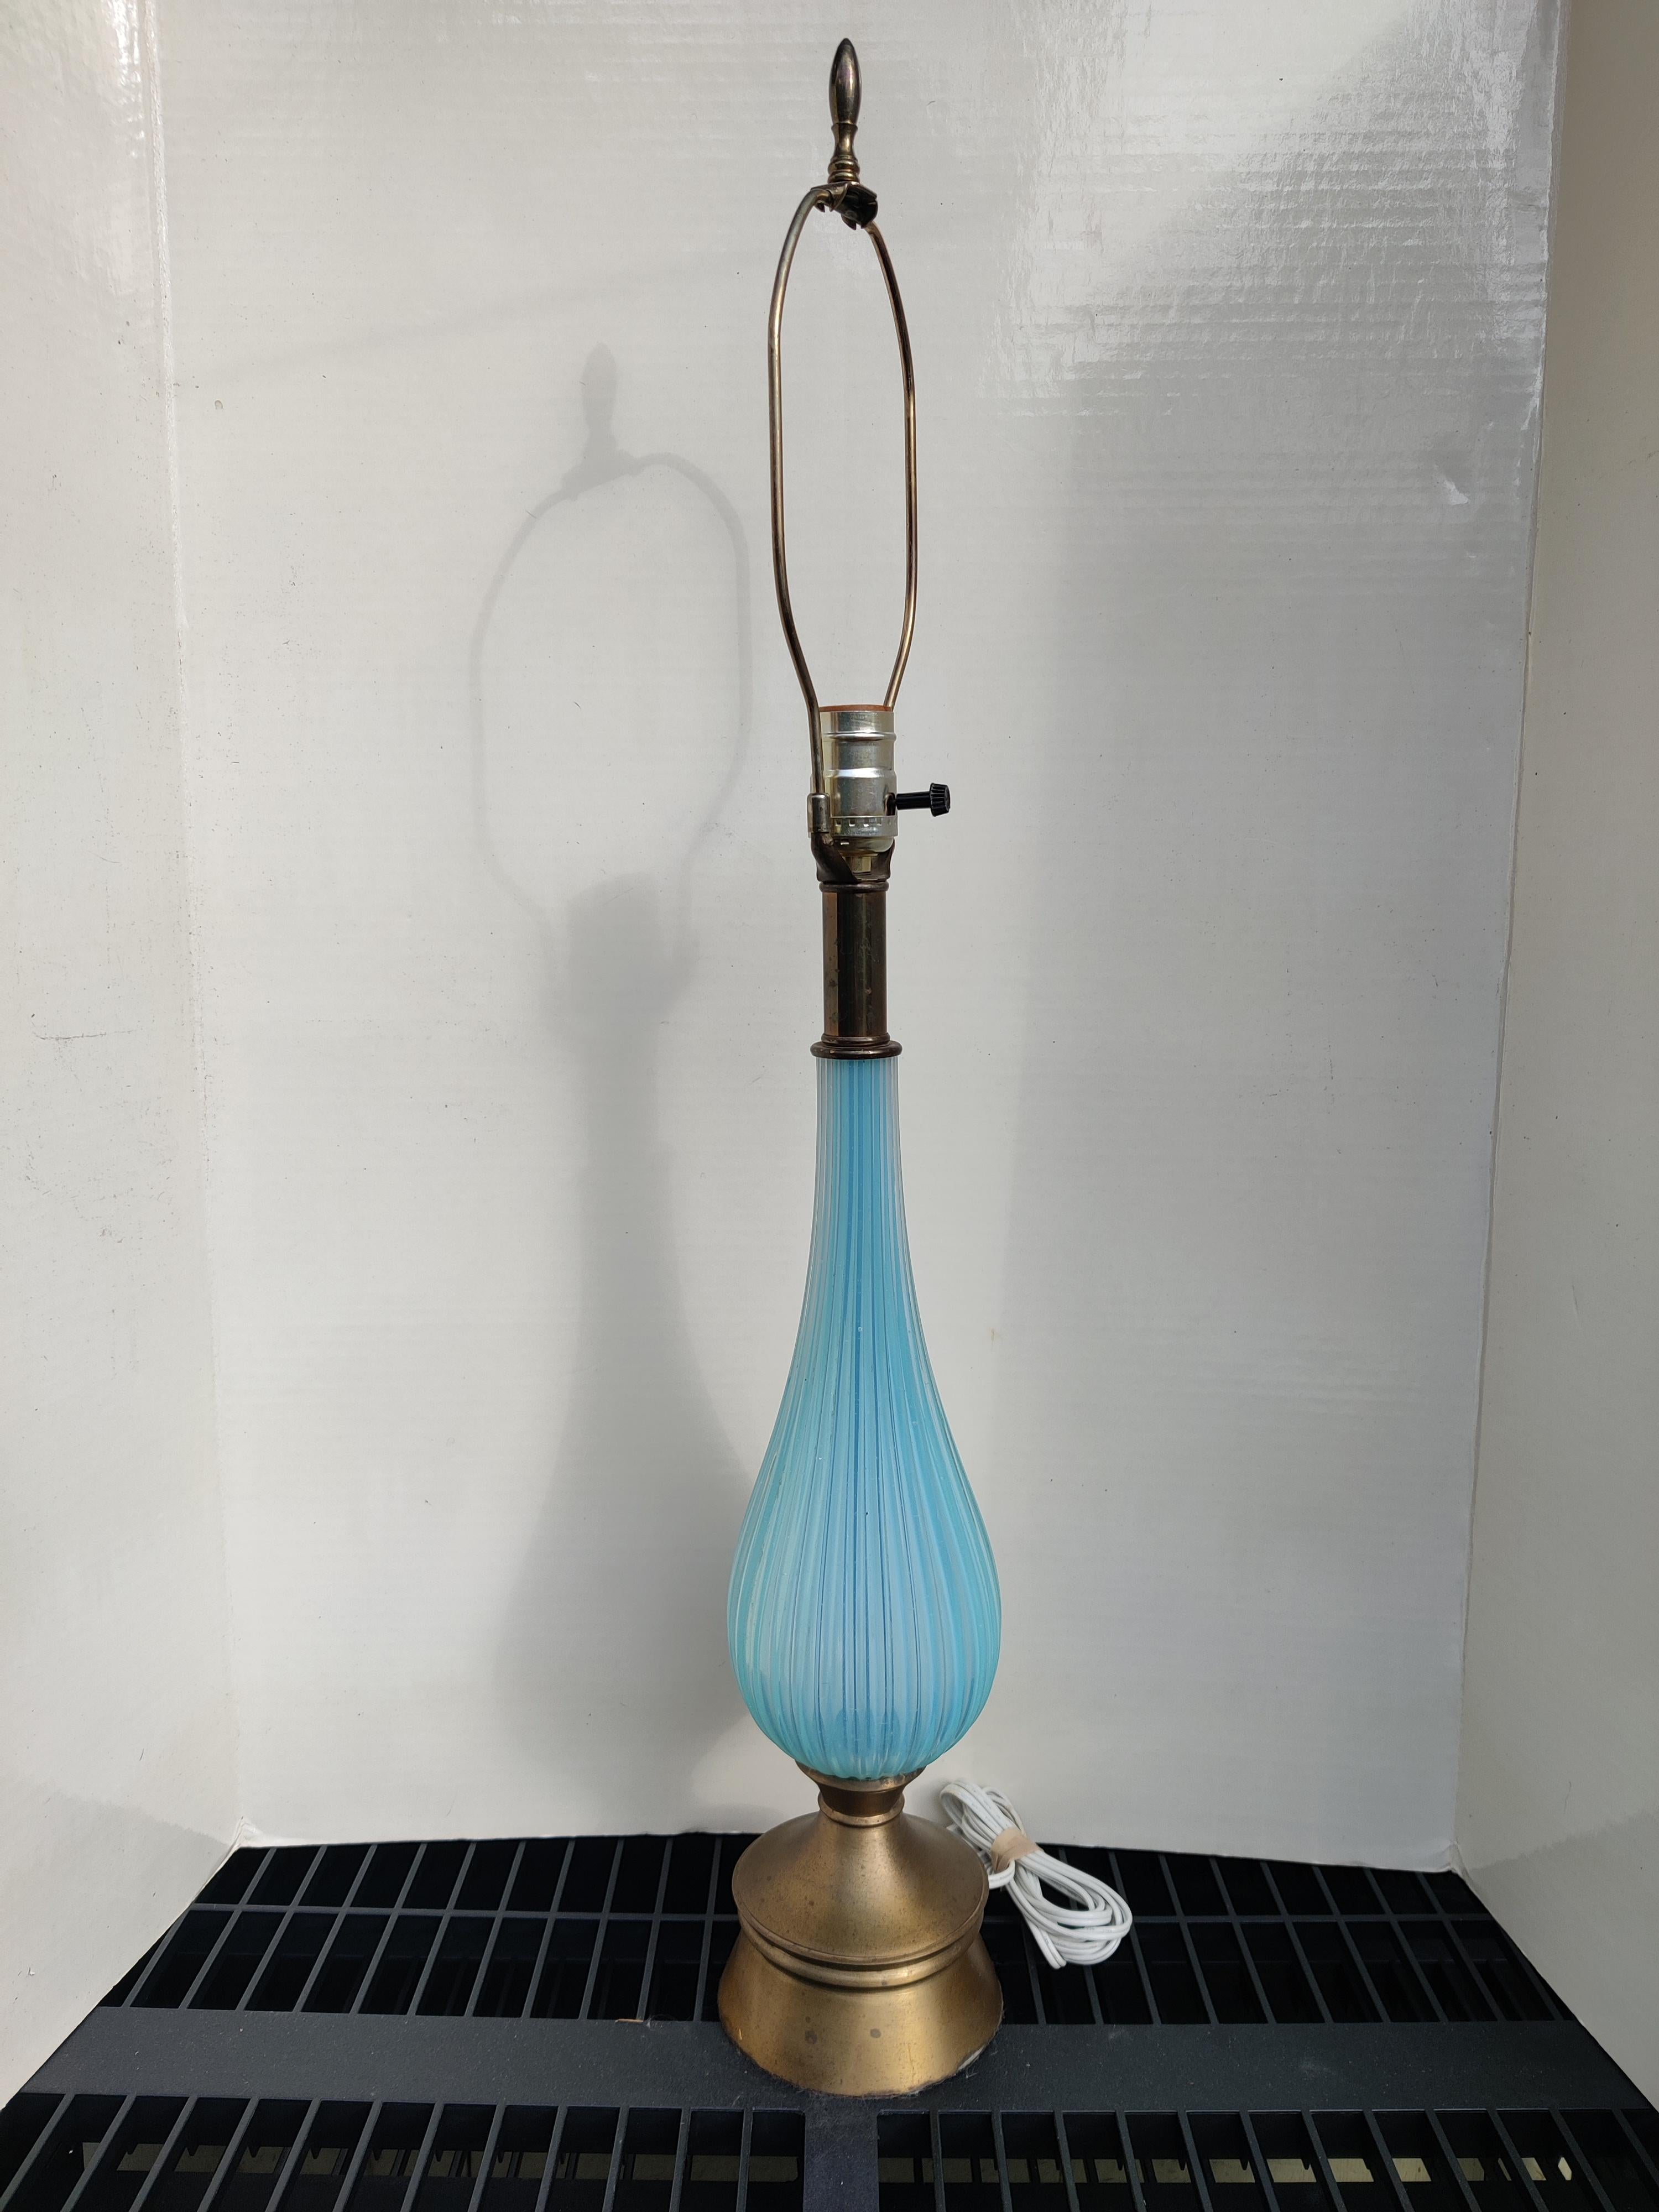 Mid Century Murano Periwinkle Fluted Glass Lamp
Base has tarnish from age.
No damage to glass.
Brass finial.
H - 31.5 base to finial
Base - 4.5 x 4.5 
Glass - 12 x 4.5